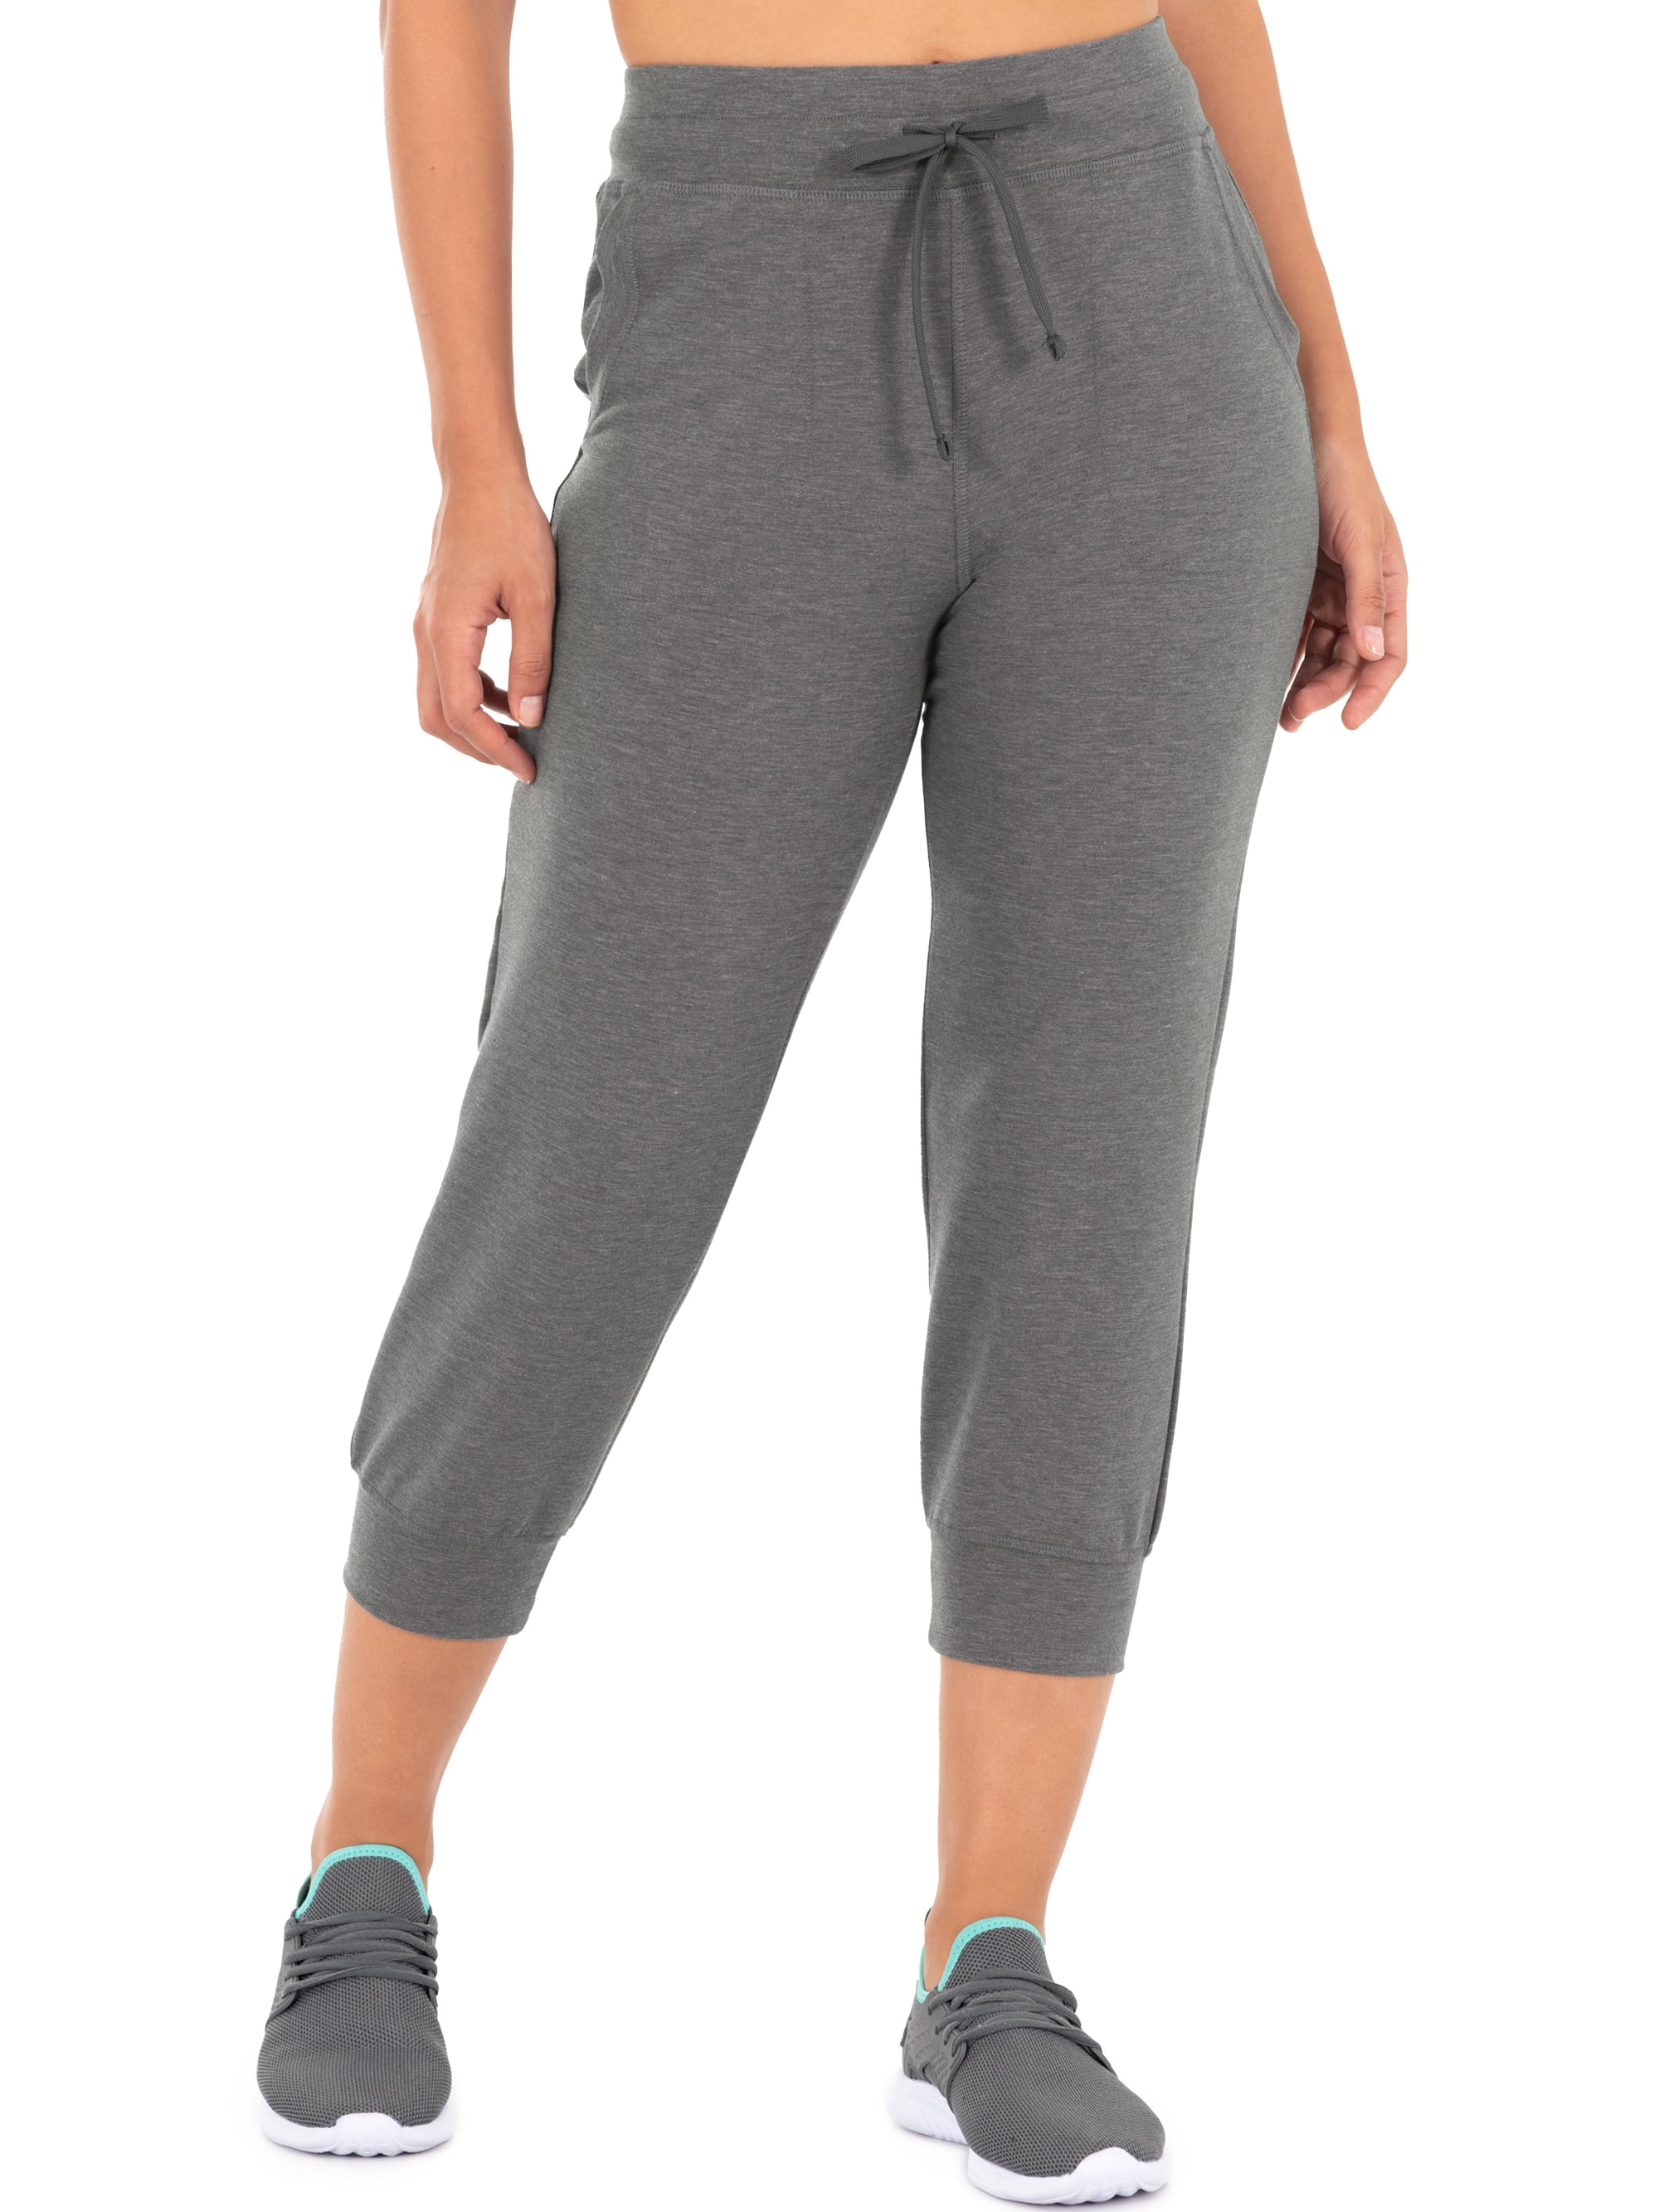 Athletic Works Women's French Terry Athleisure Capri Jogger Pant -  Walmart.com